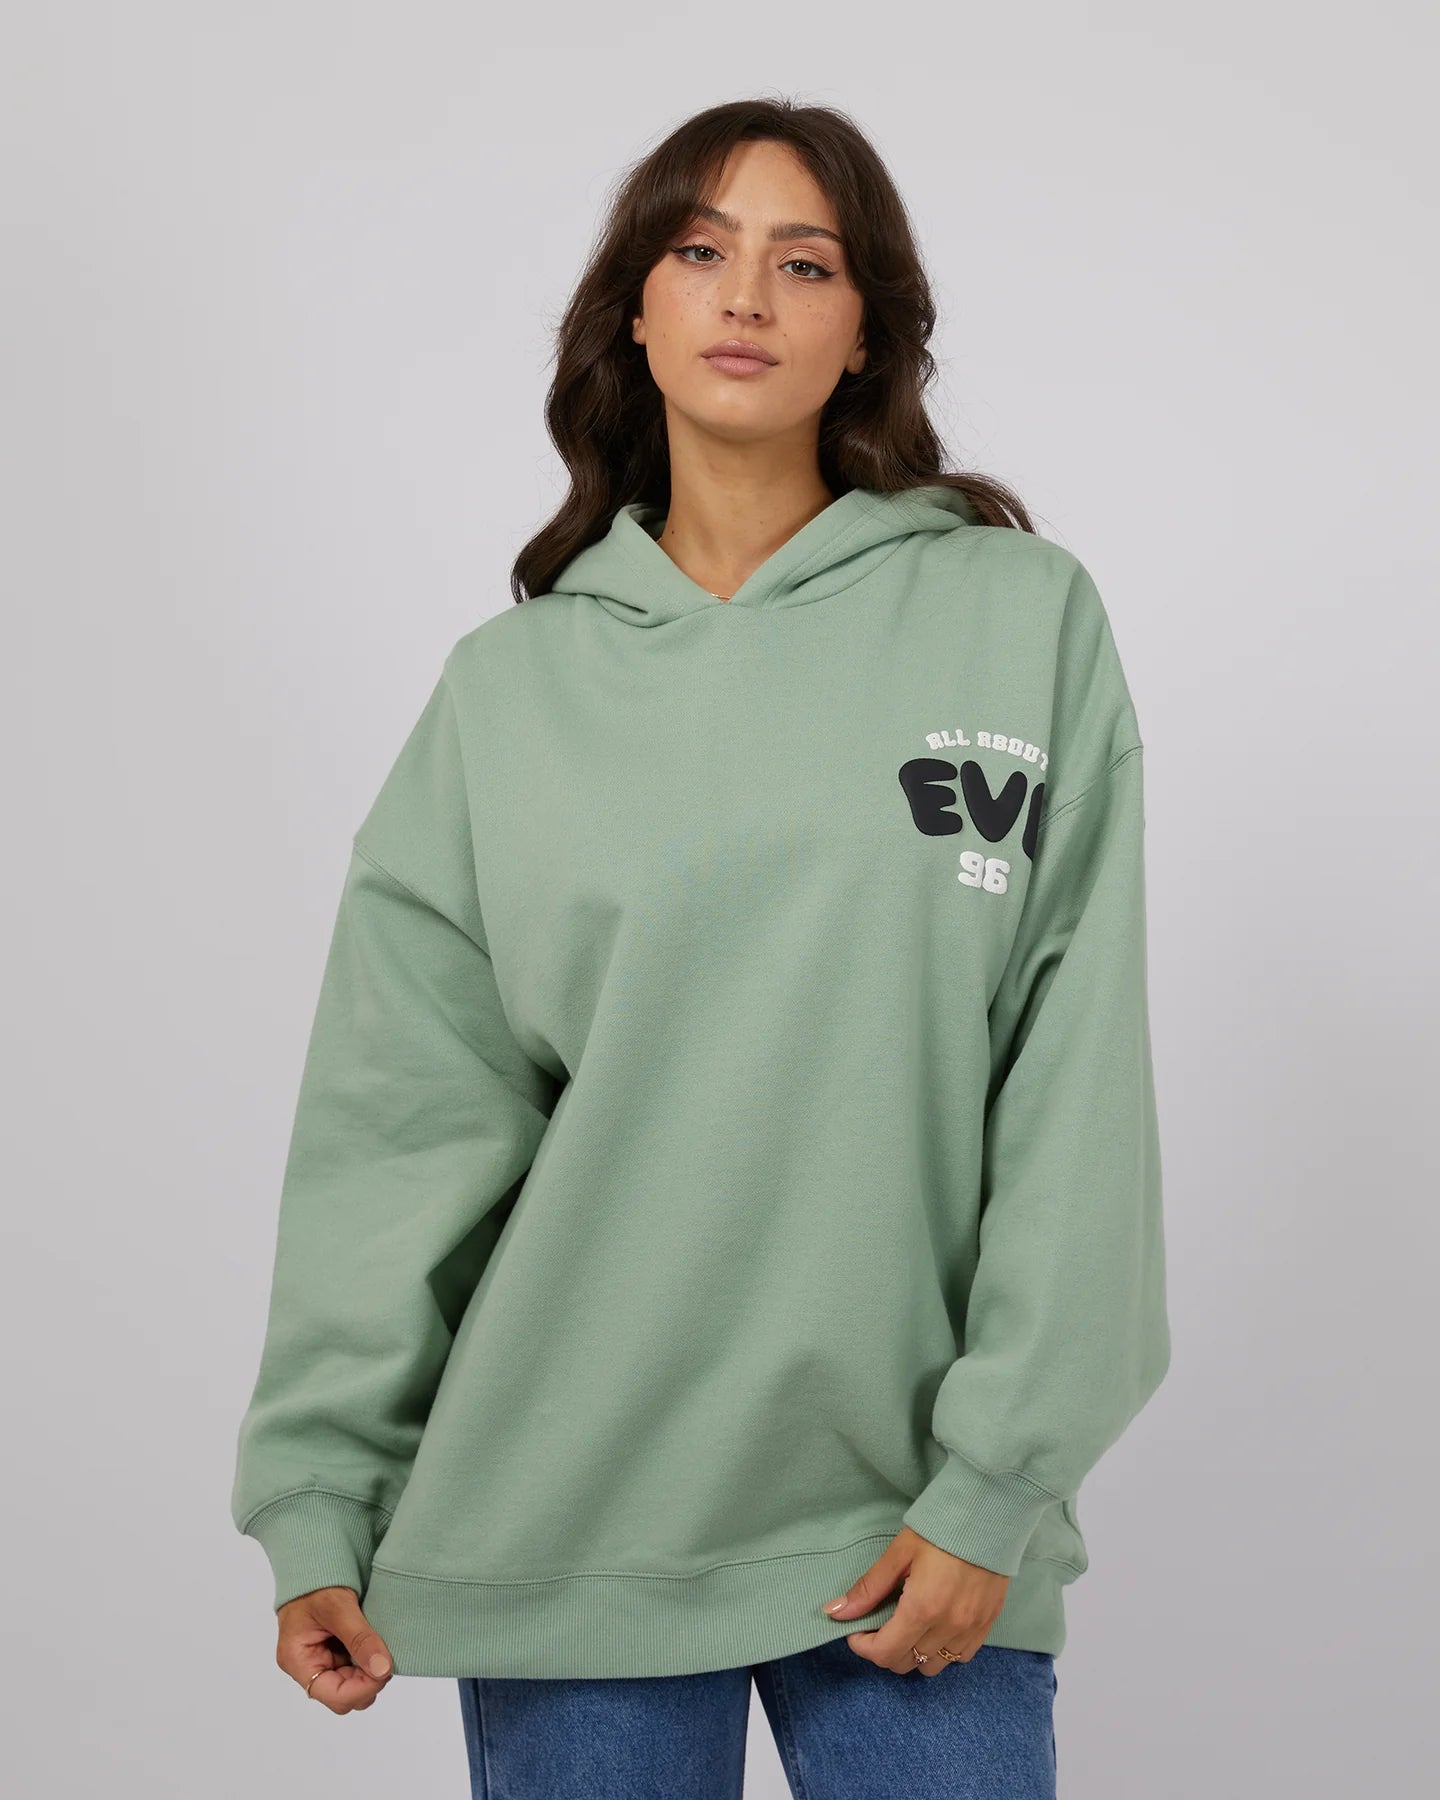 ALL ABOUT EVE Exhale Hoodie - Sage